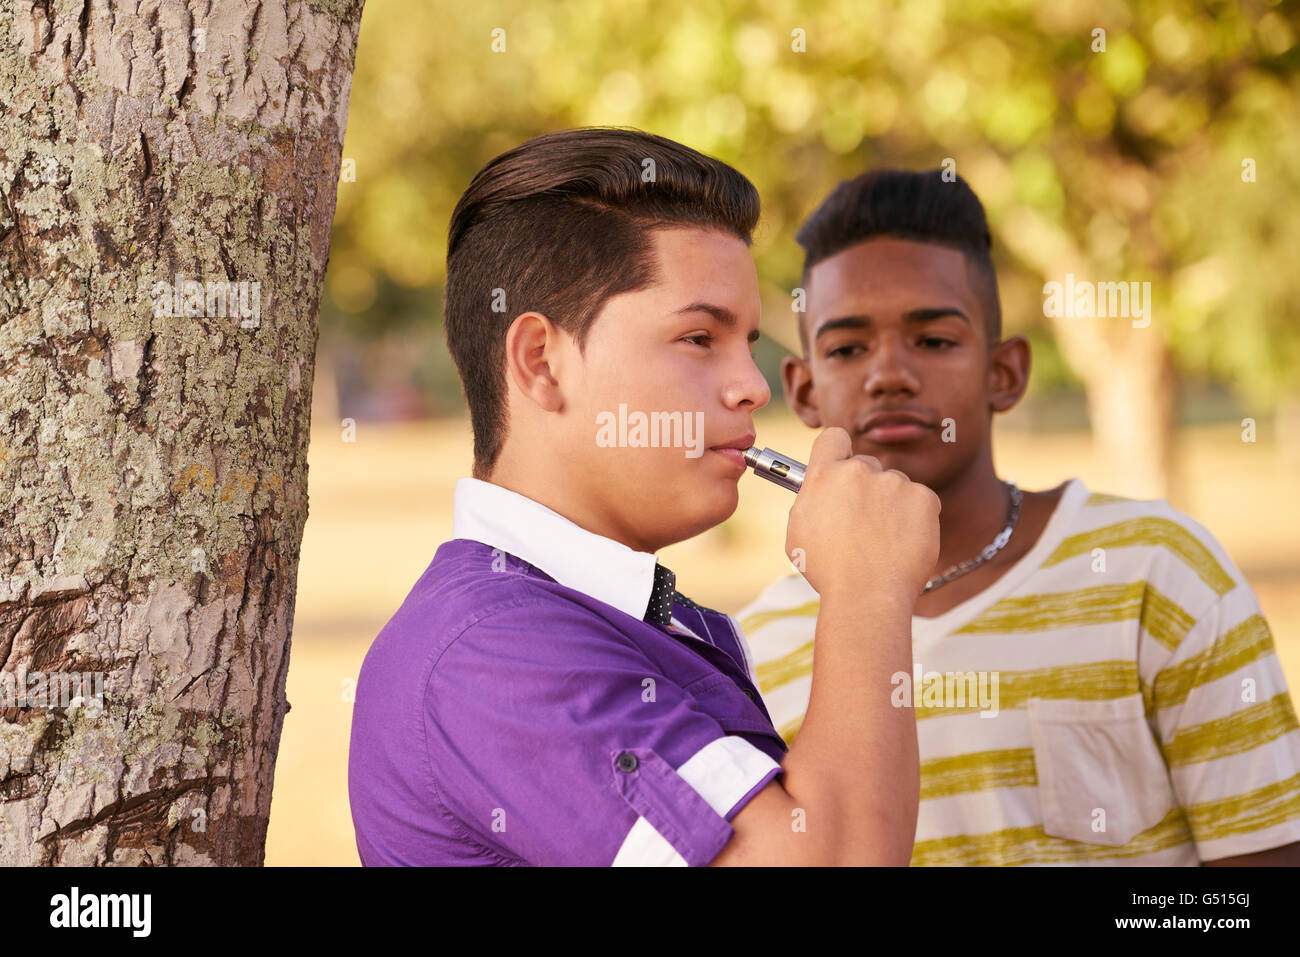 Kids in park smoking electronic cigarette. Concept of smoking and social  issues with young teenagers Stock Photo - Alamy